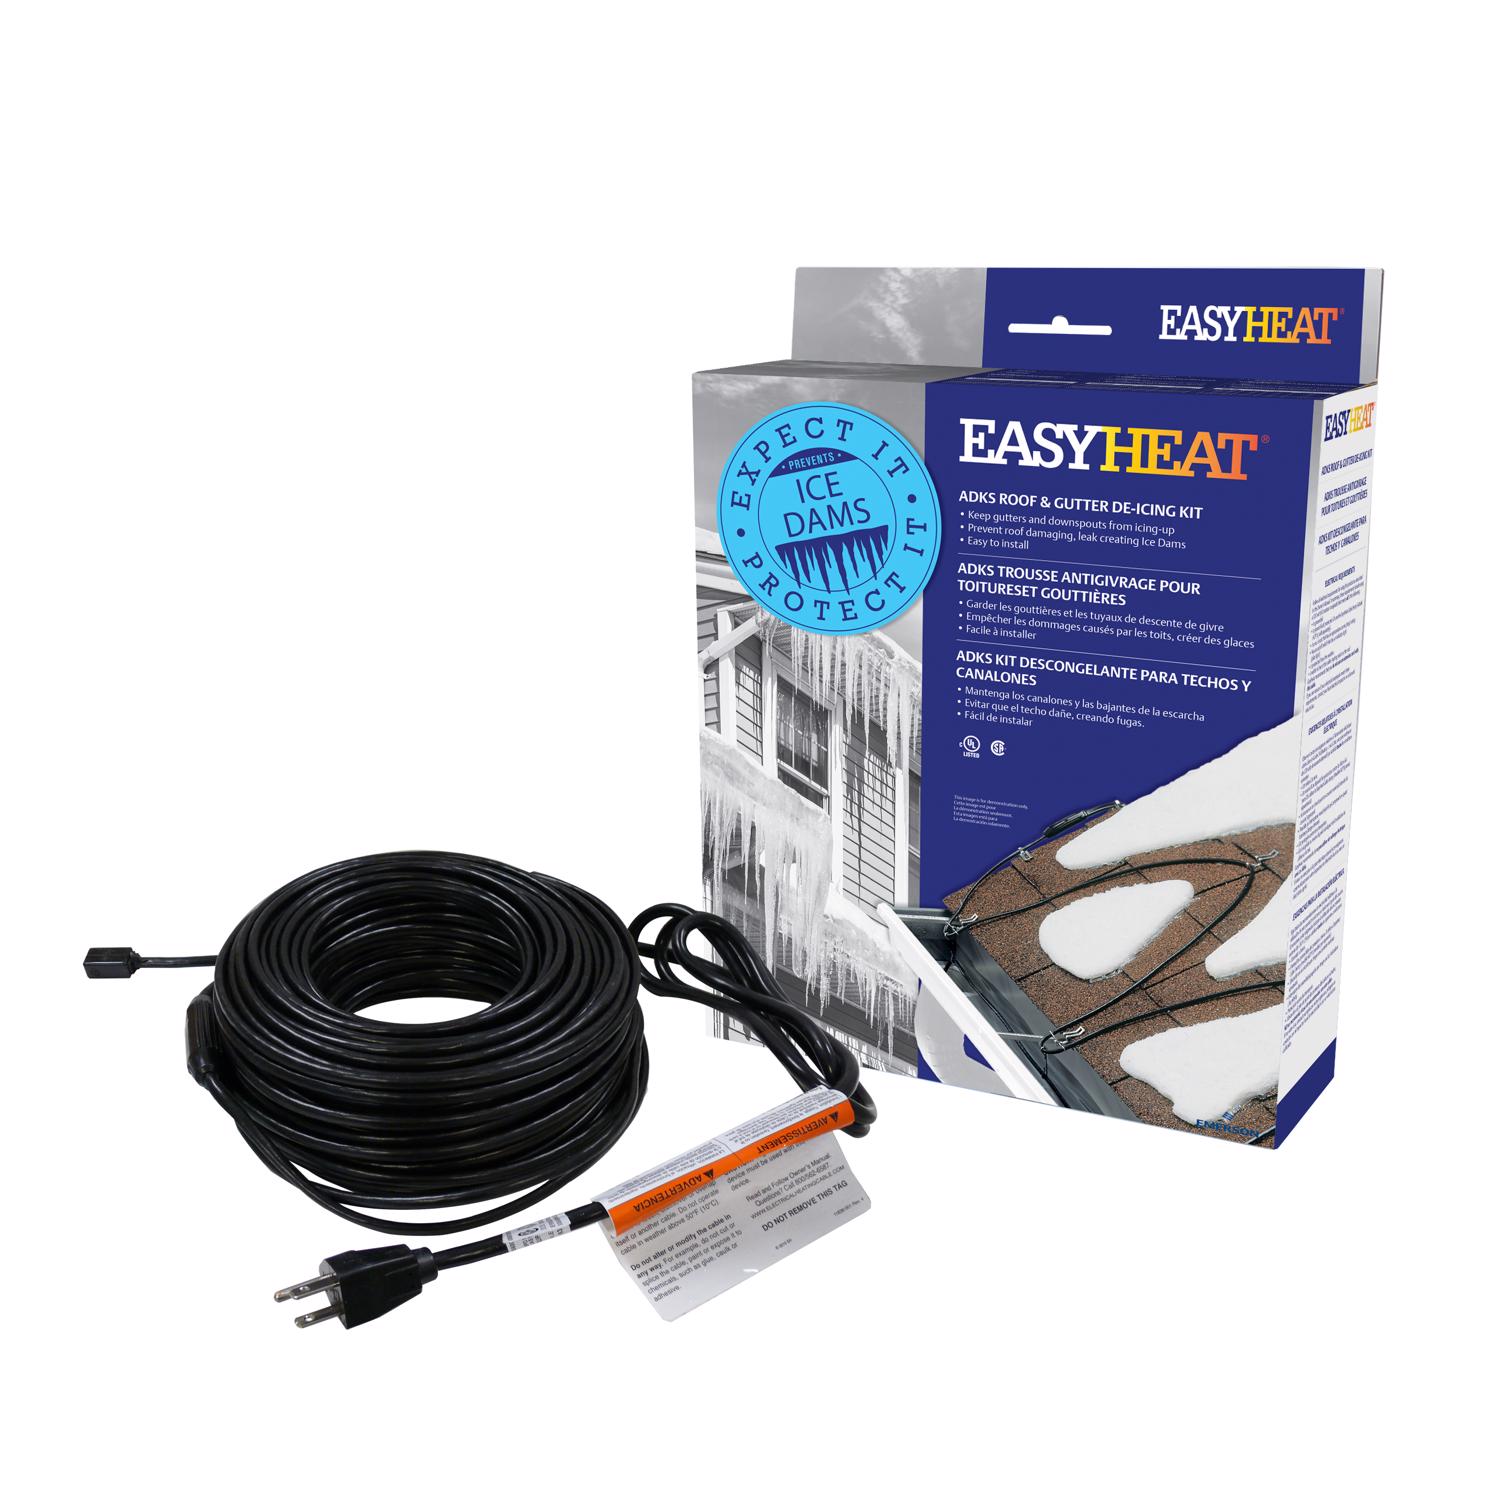 Easy Heat AHB 40 ft. L Heating Cable For Water Pipe - Ace Hardware